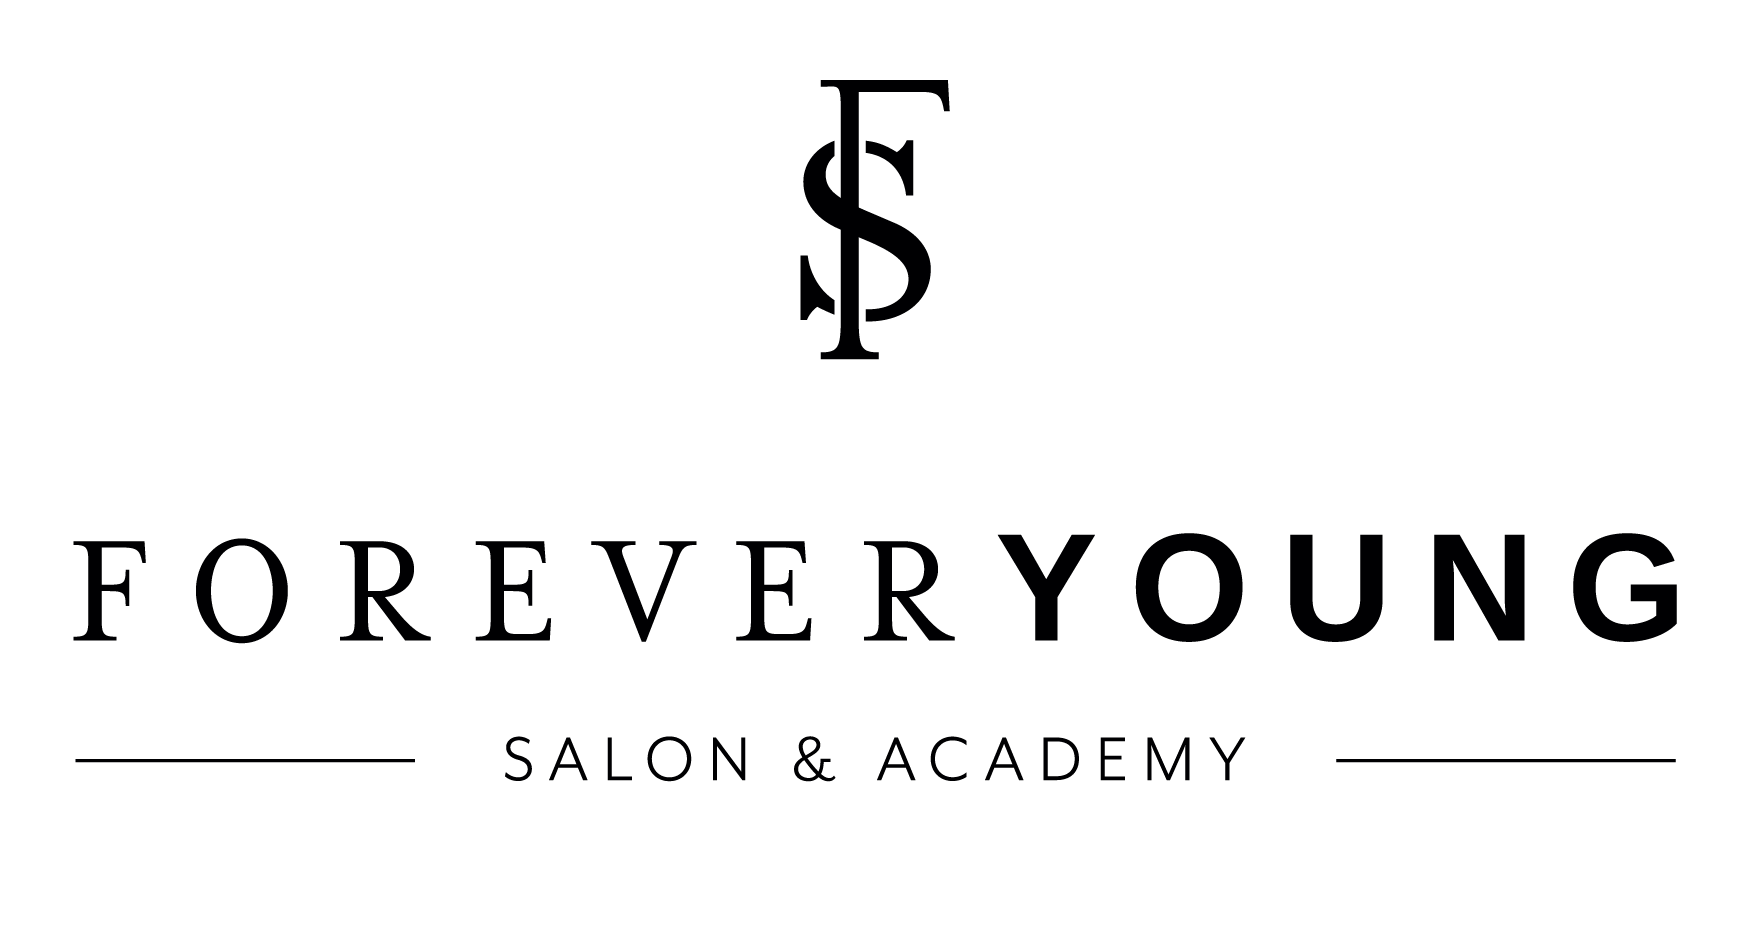 Logo's Foreveryoung